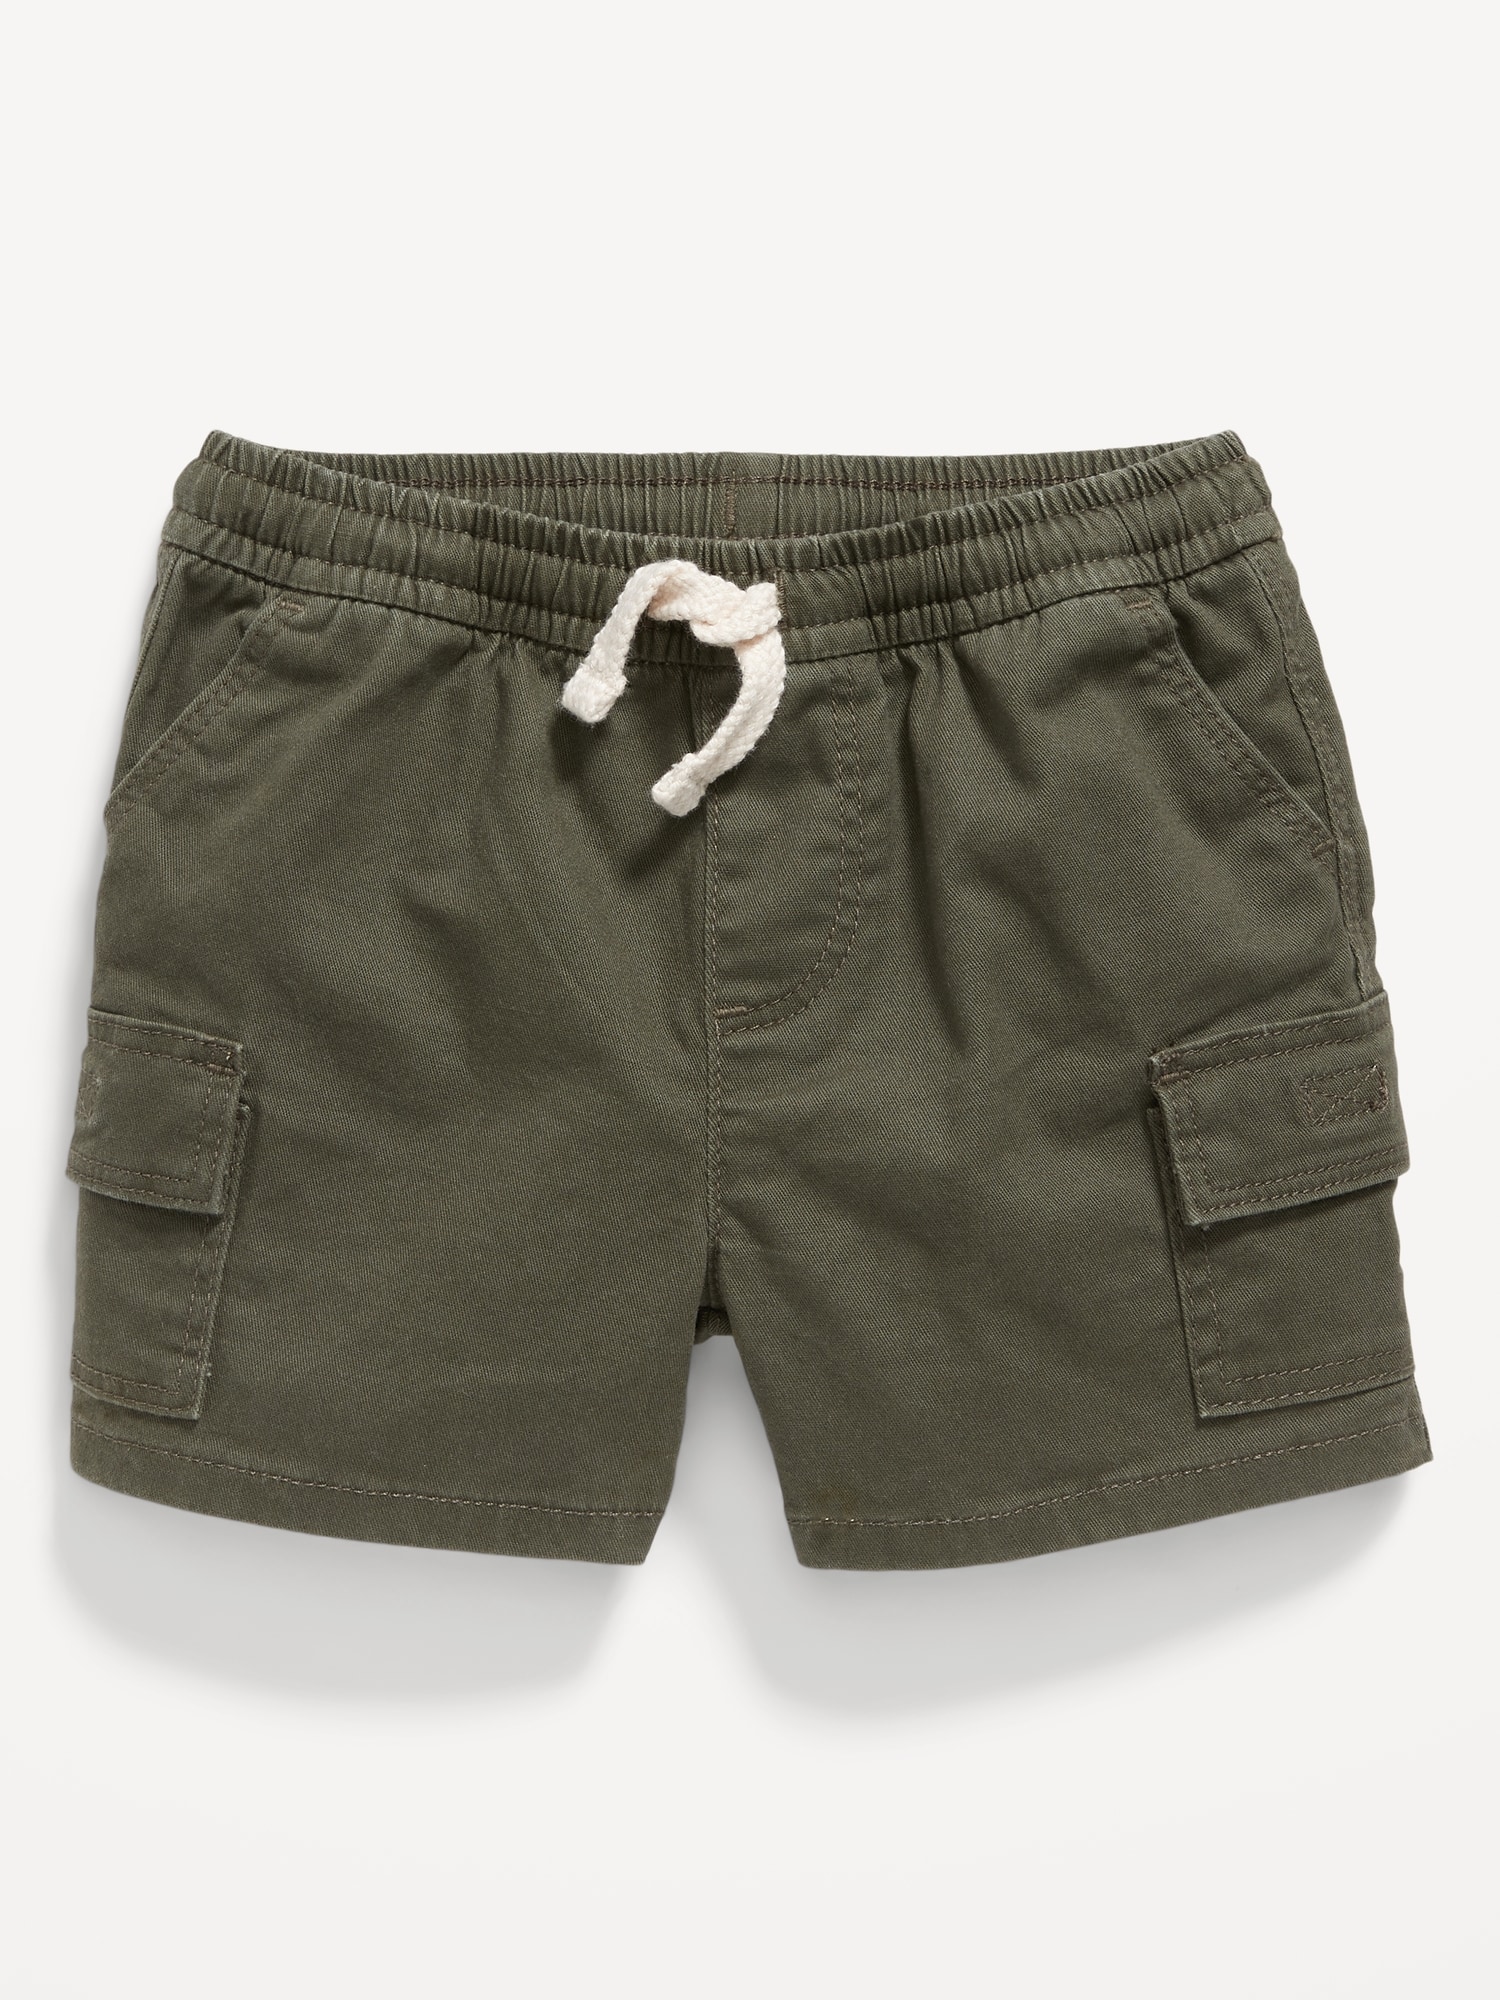 Functional Drawstring Cargo Shorts for Baby Hot Deal